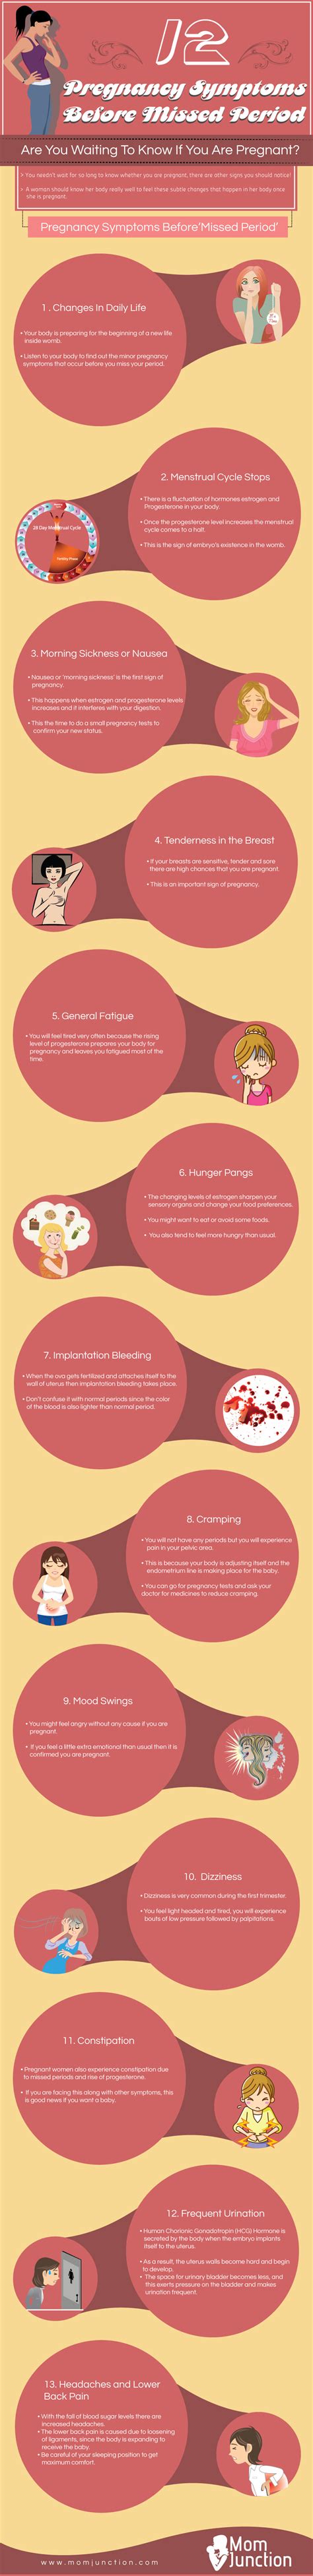 Early pregnancy symptoms show up weeks before your period, but an average waiting period of two weeks is recommended from the. 12 Pregnancy Symptoms Before Missed Period #infographic ...